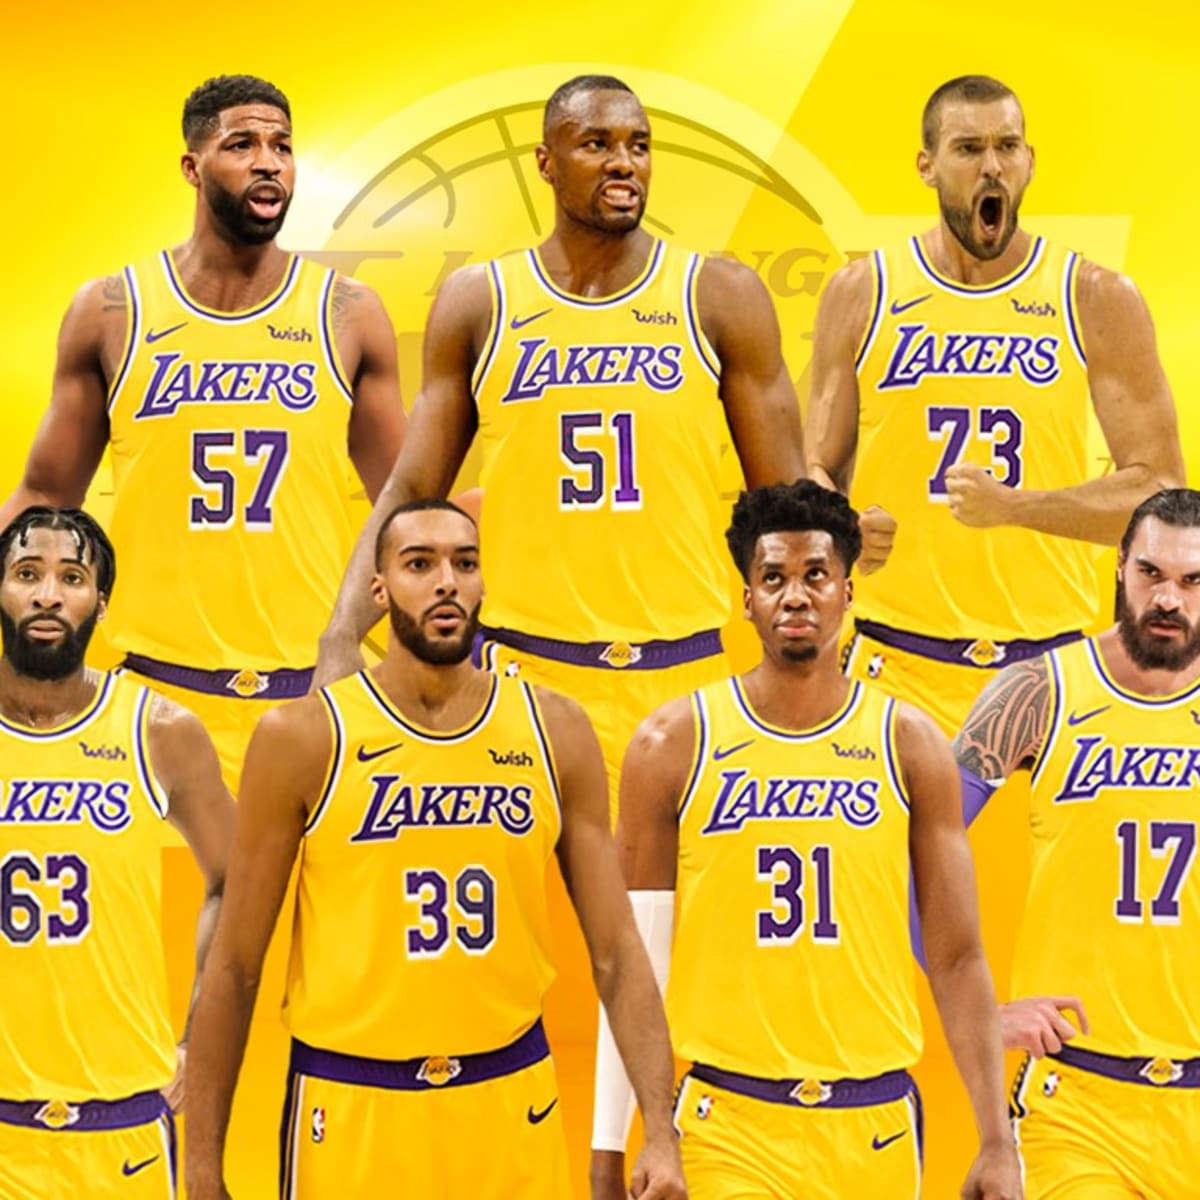 SportsCenter - This Los Angeles Lakers team could be deep next